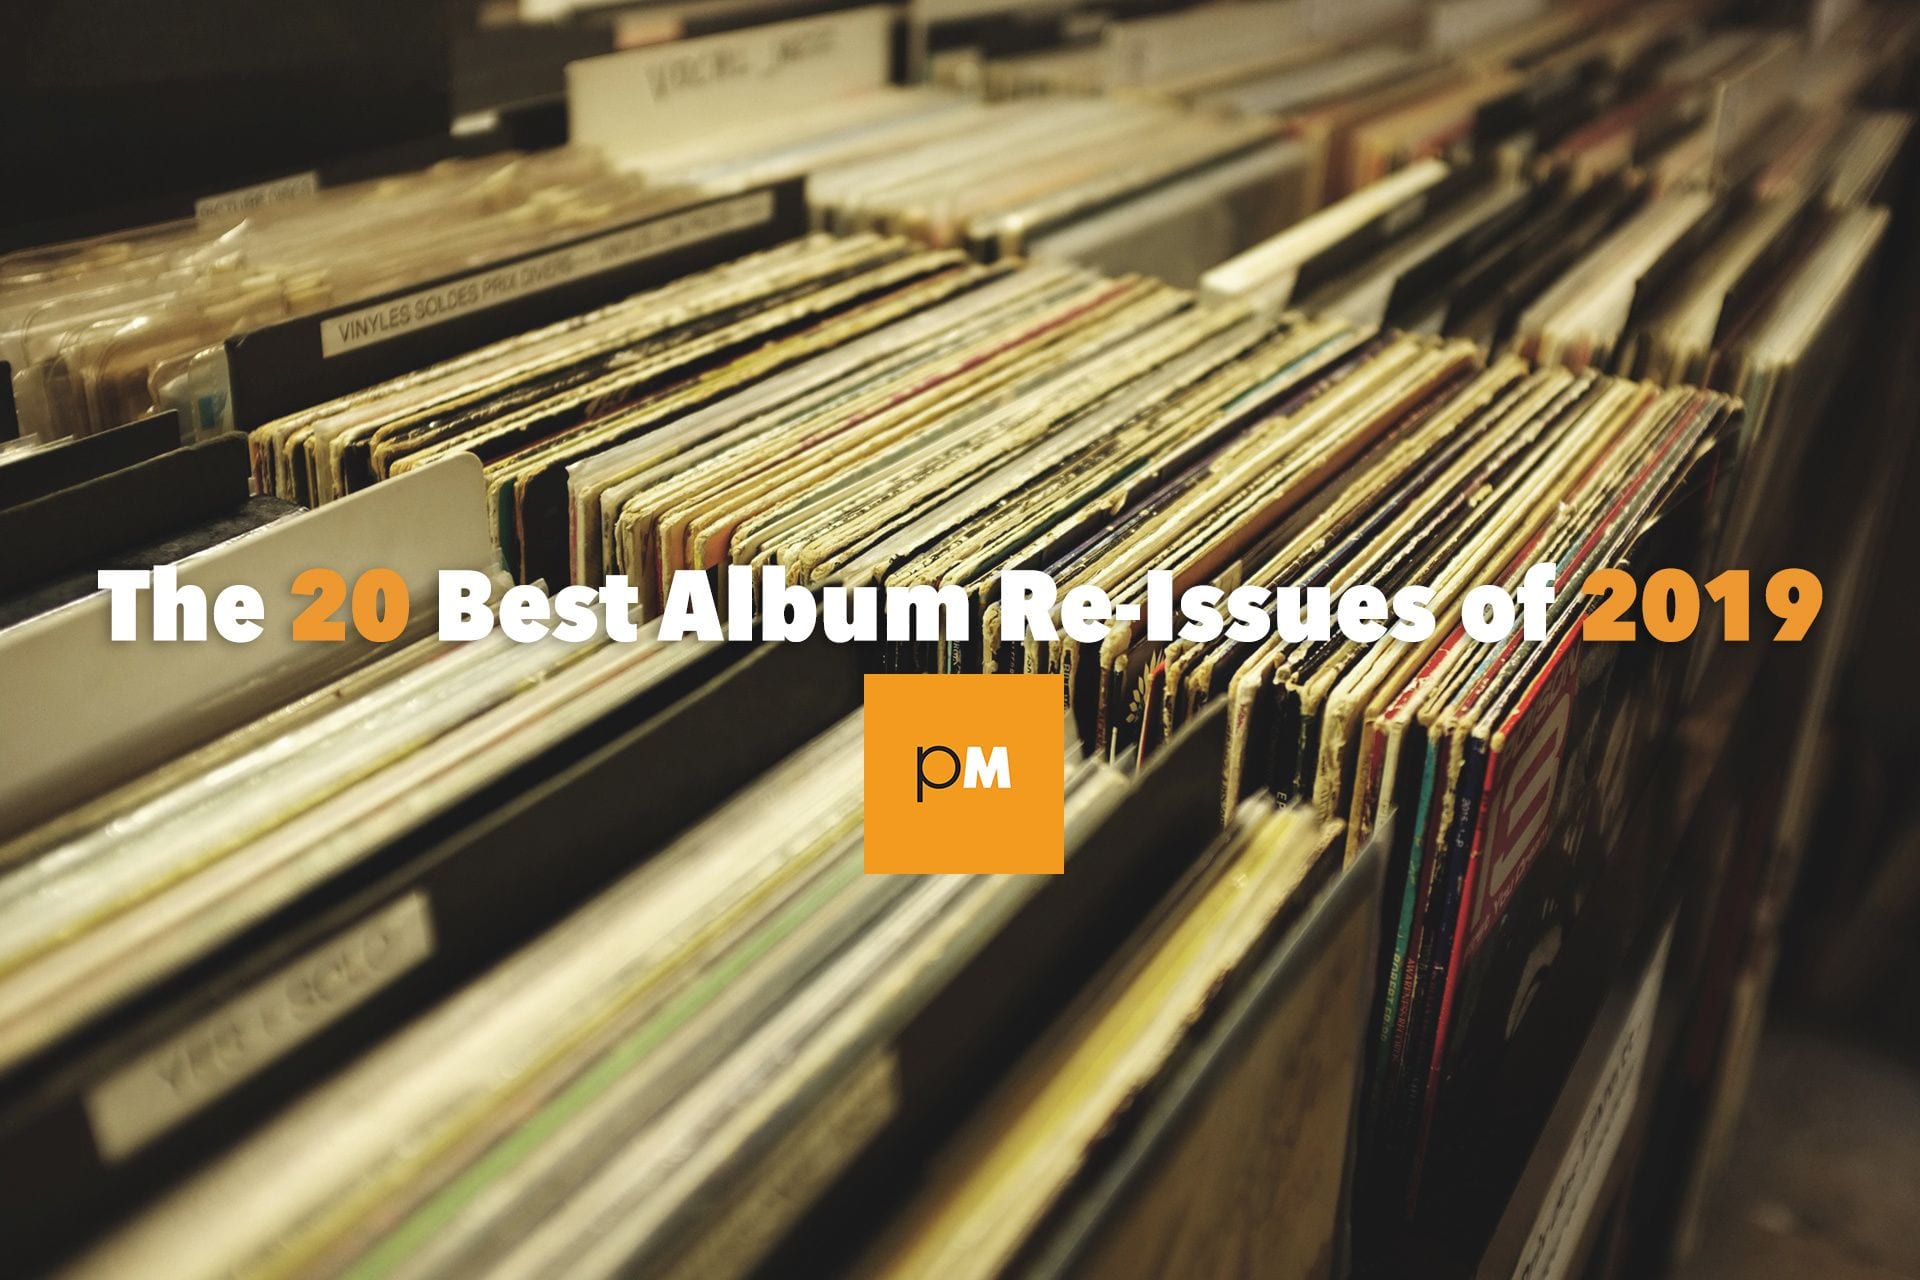 The 20 Best Album Re-Issues of 2019